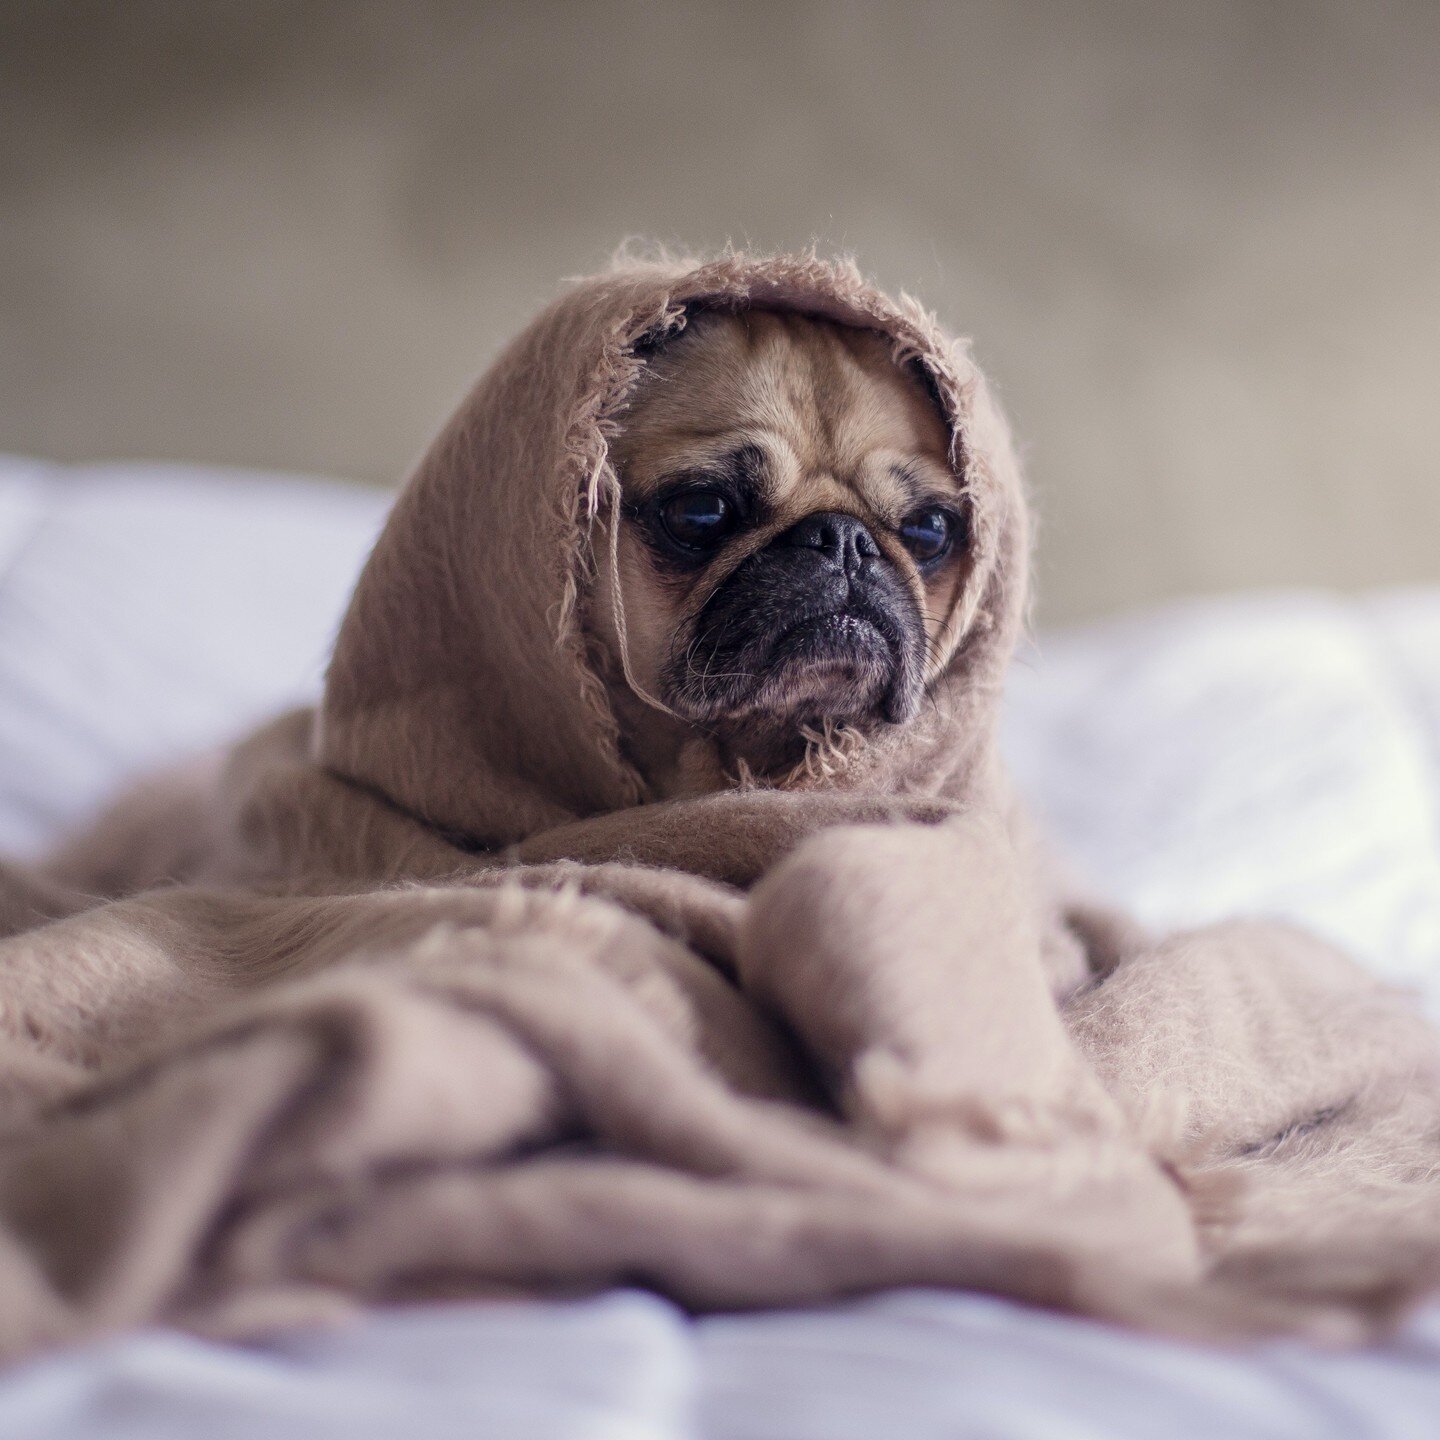 Do rising interest rates have you feeling anxious about your mortgage repayments? 😬

As much as we all feel the impulse to curl up in a blanket in response to certain challenges (particularly this winter! 🥶), it helps to be proactive.

Below are 3 